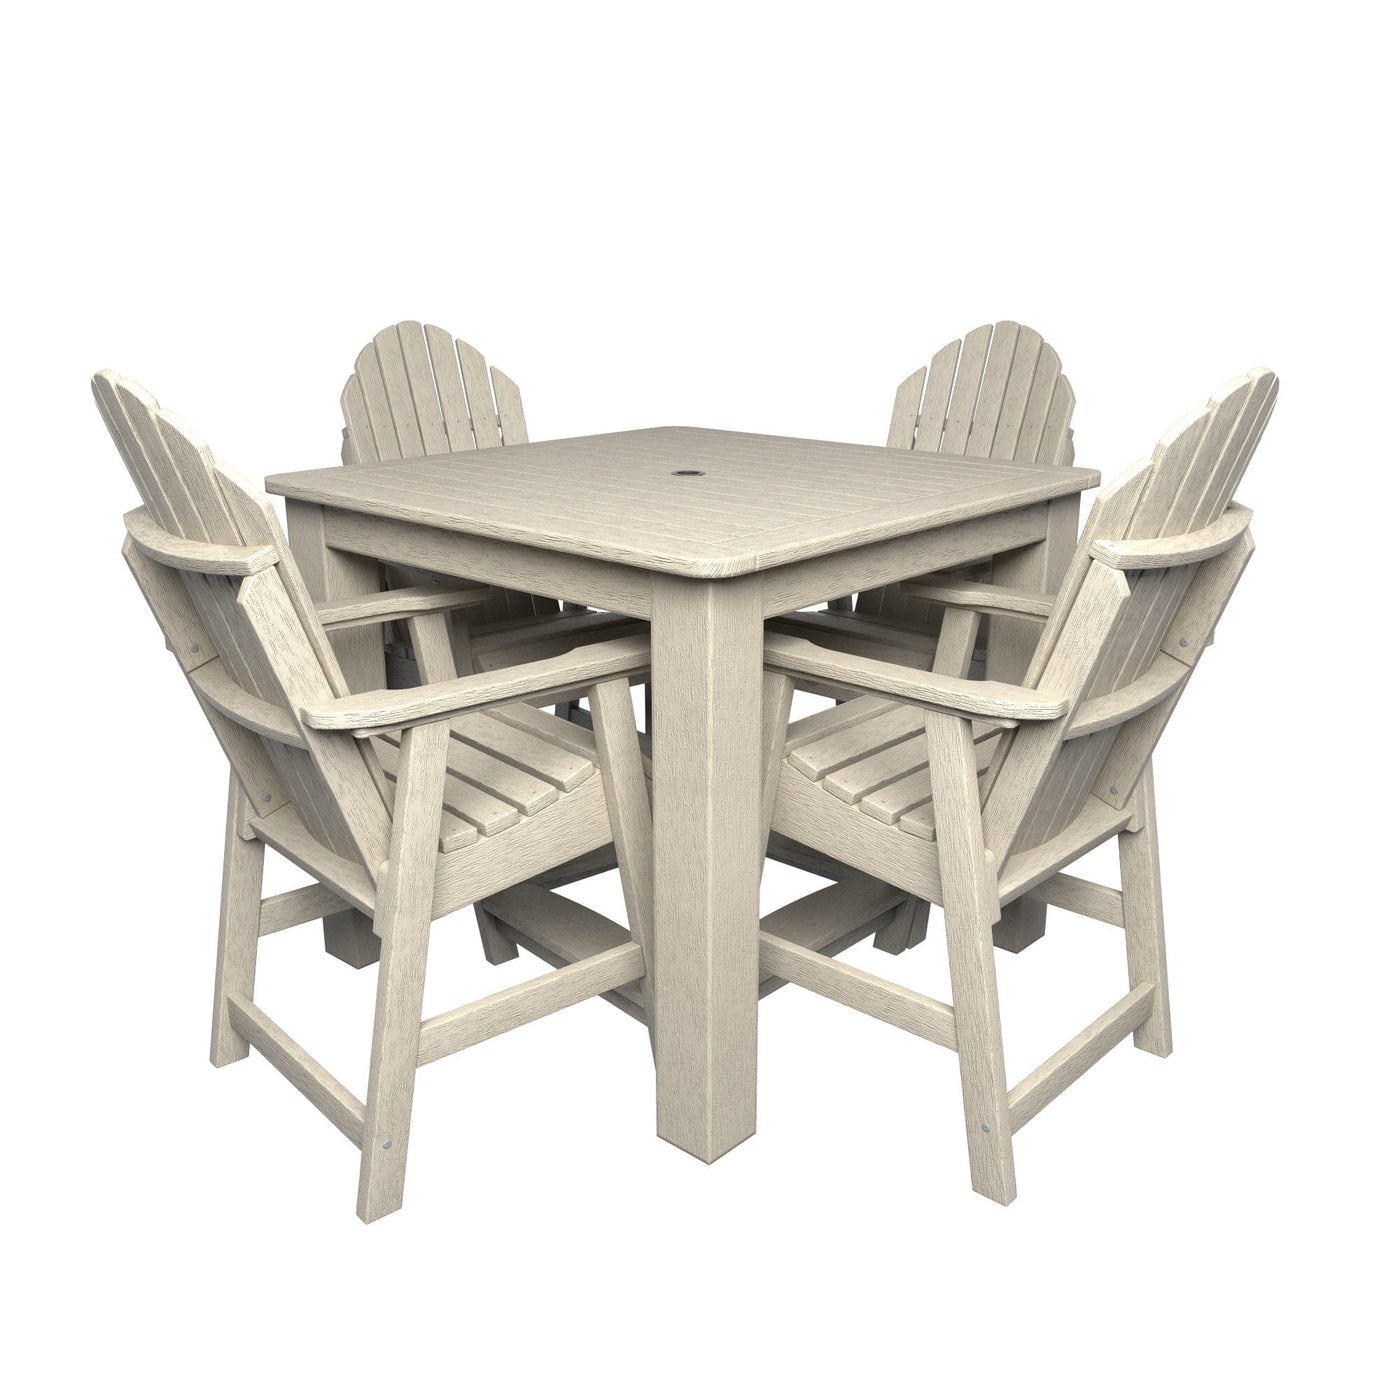 Hamilton 5pc Square Dining Set 42in x 42in - Counter Height Dining Highwood USA Whitewash 